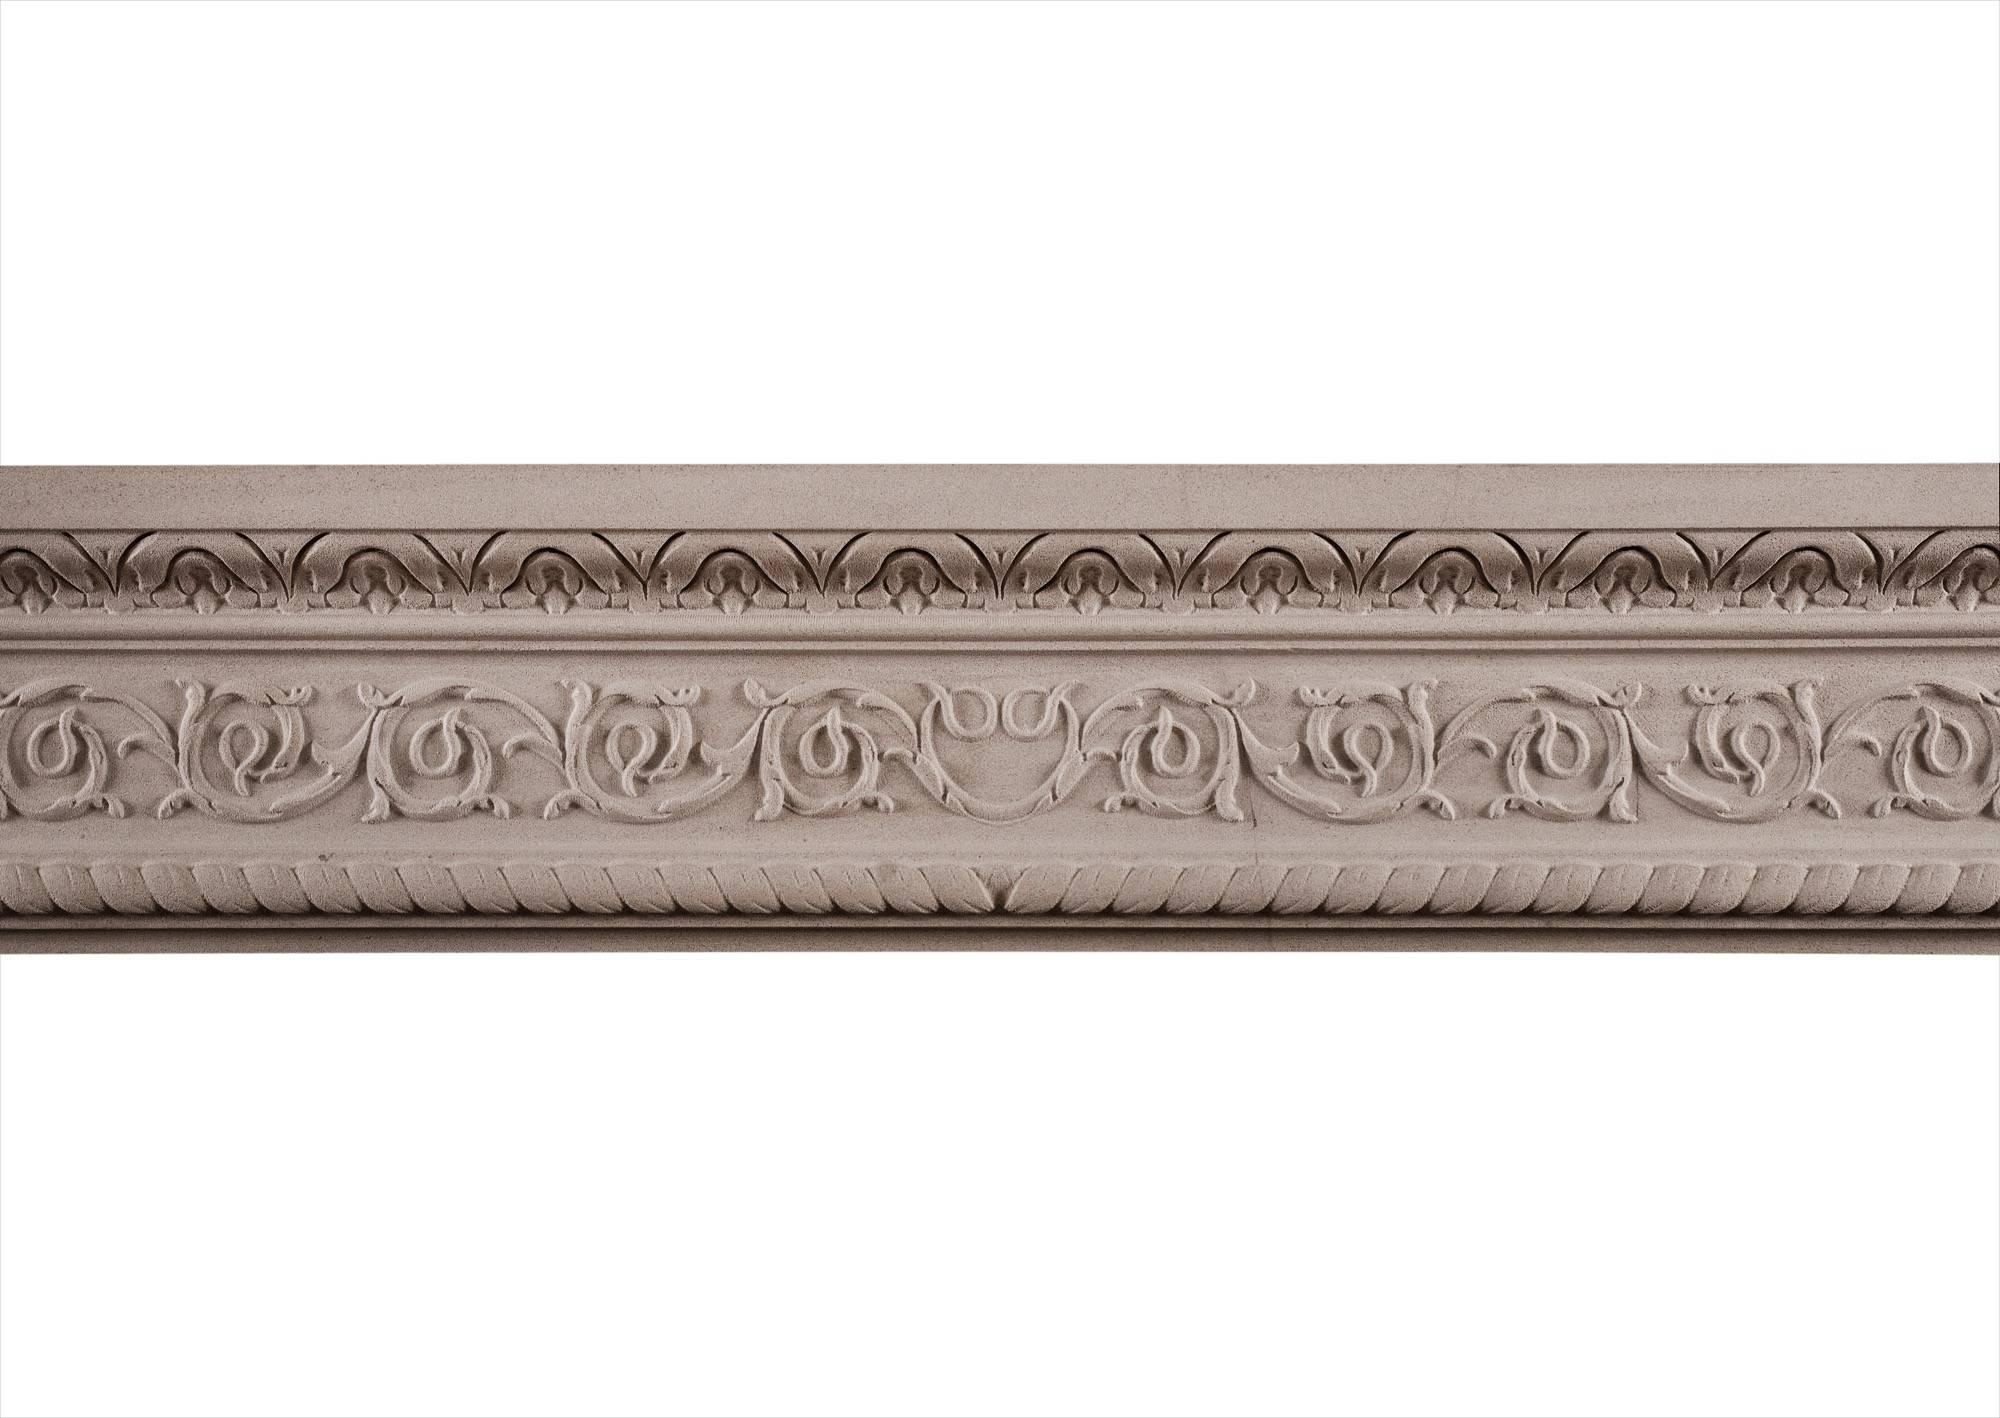 A Classic carved limestone fireplace with flowing scrolled detailing to frieze and jambs with leaf and rope mouldings and outer and inner edges respectively. A timeless and elegant 18th century design could be made in bespoke sizes.

Measures: